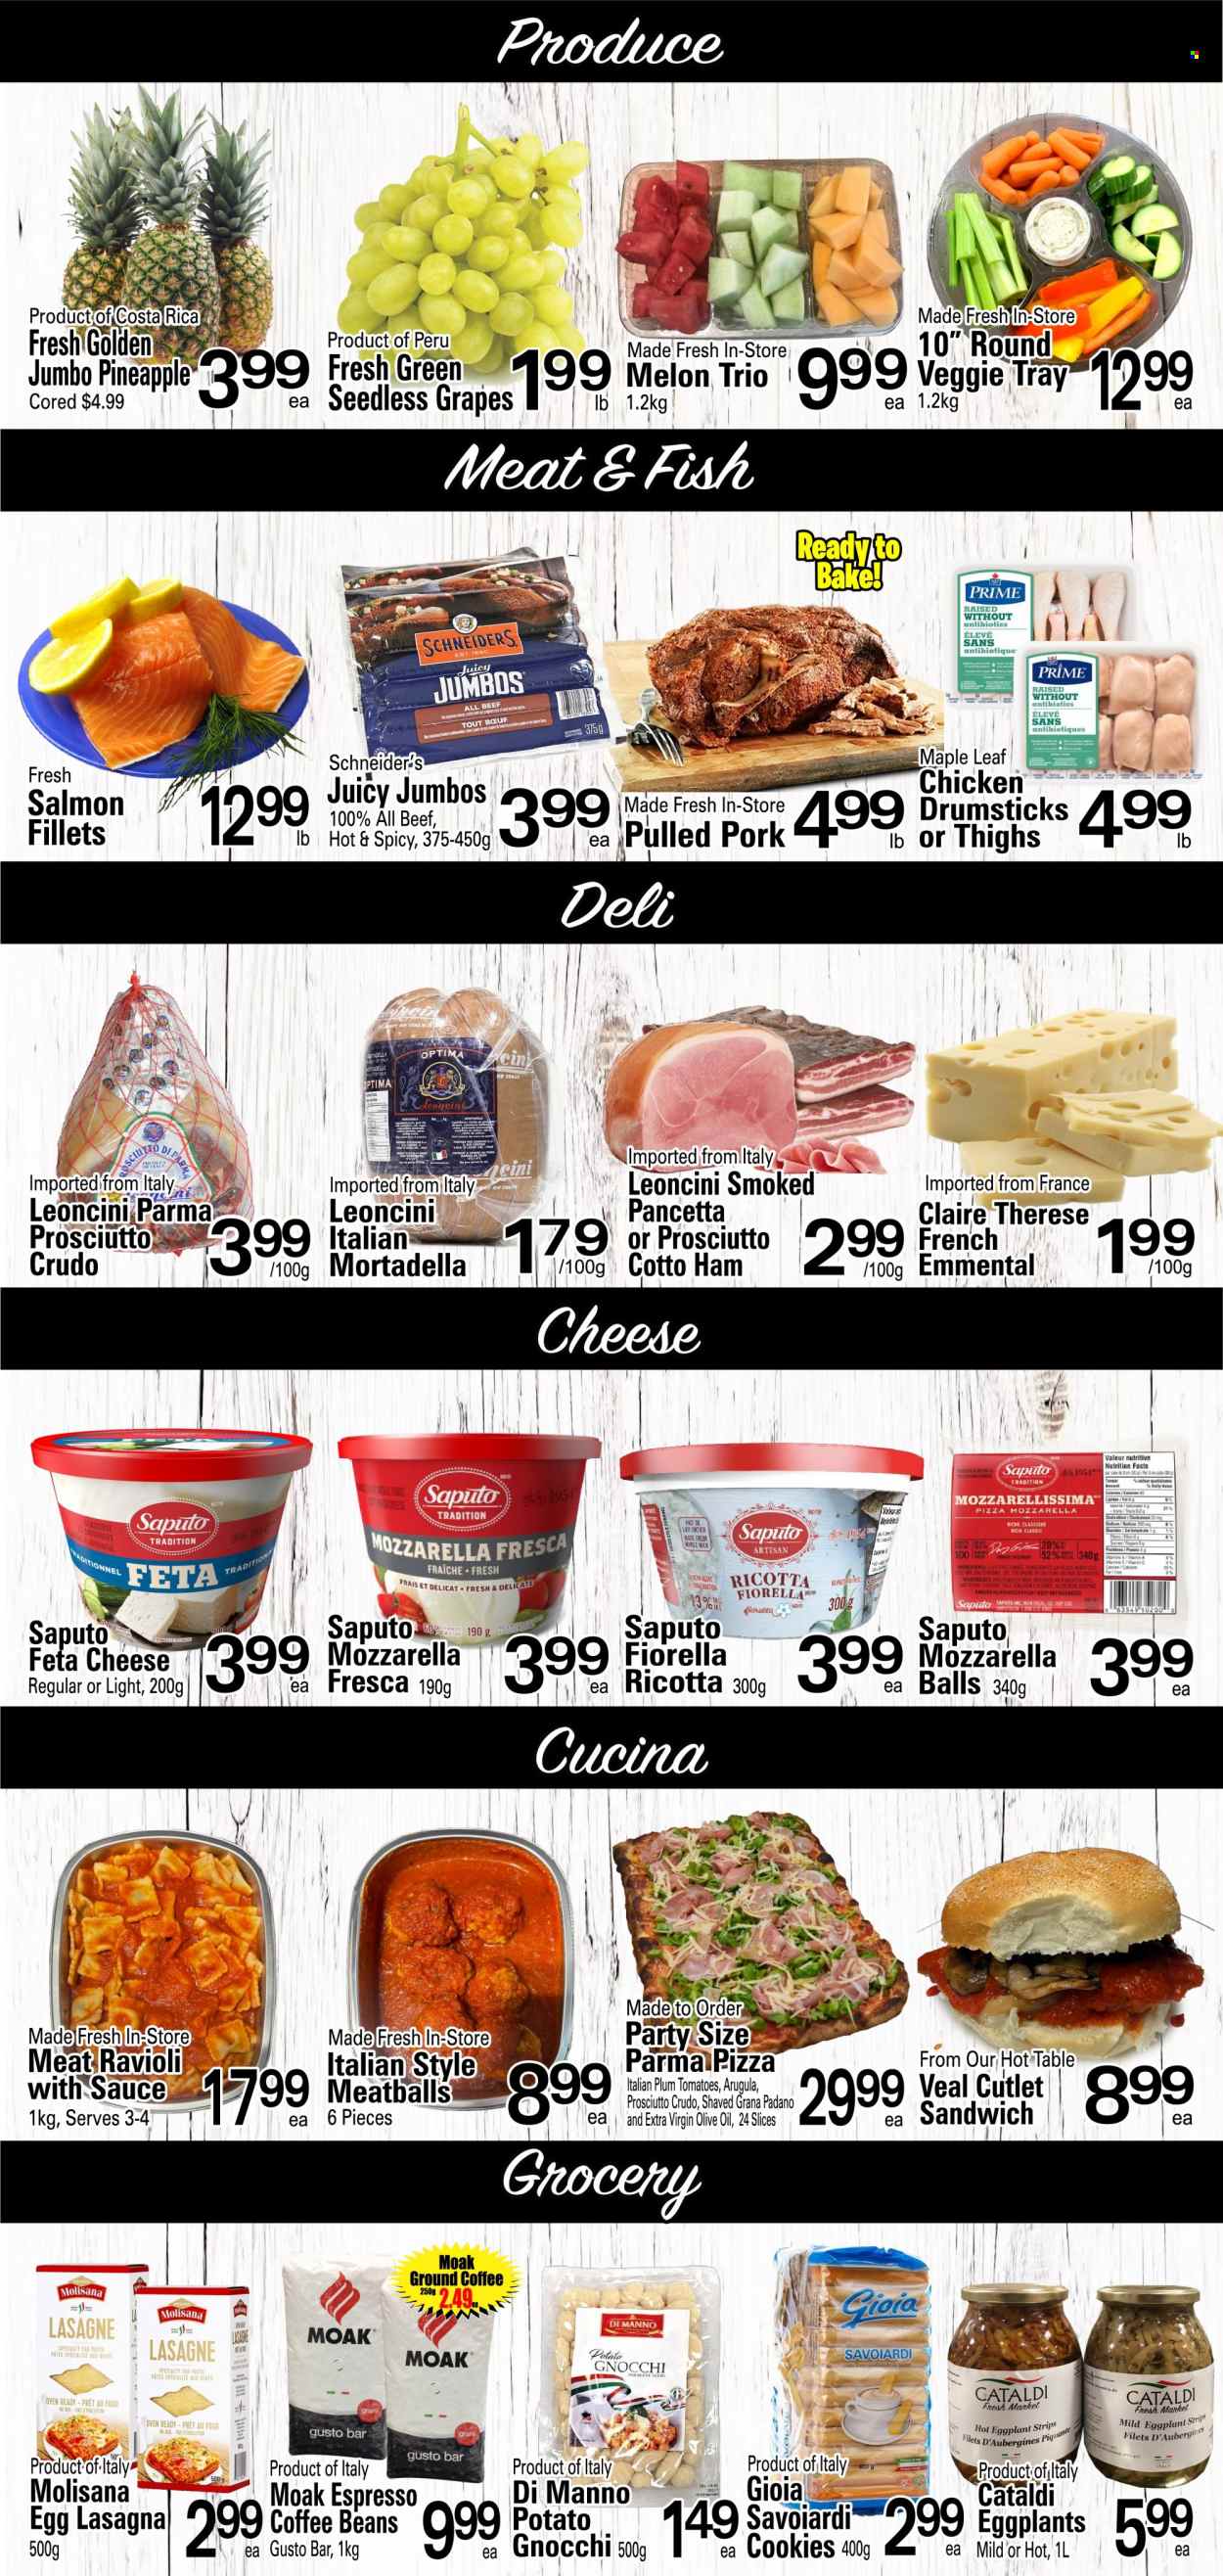 thumbnail - Cataldi Fresh Market Flyer - March 29, 2023 - April 04, 2023 - Sales products - grapes, pineapple, melons, salmon, salmon fillet, fish, ravioli, pizza, meatballs, sandwich, pasta, lasagna meal, pulled pork, mortadella, ham, cheese, feta, Grana Padano, milk, cookies, lady fingers, salt, extra virgin olive oil, olive oil, oil, coffee, coffee beans, ground coffee, chicken, veal cutlet, veal meat, pork meat, gnocchi, ricotta, pancetta. Page 2.